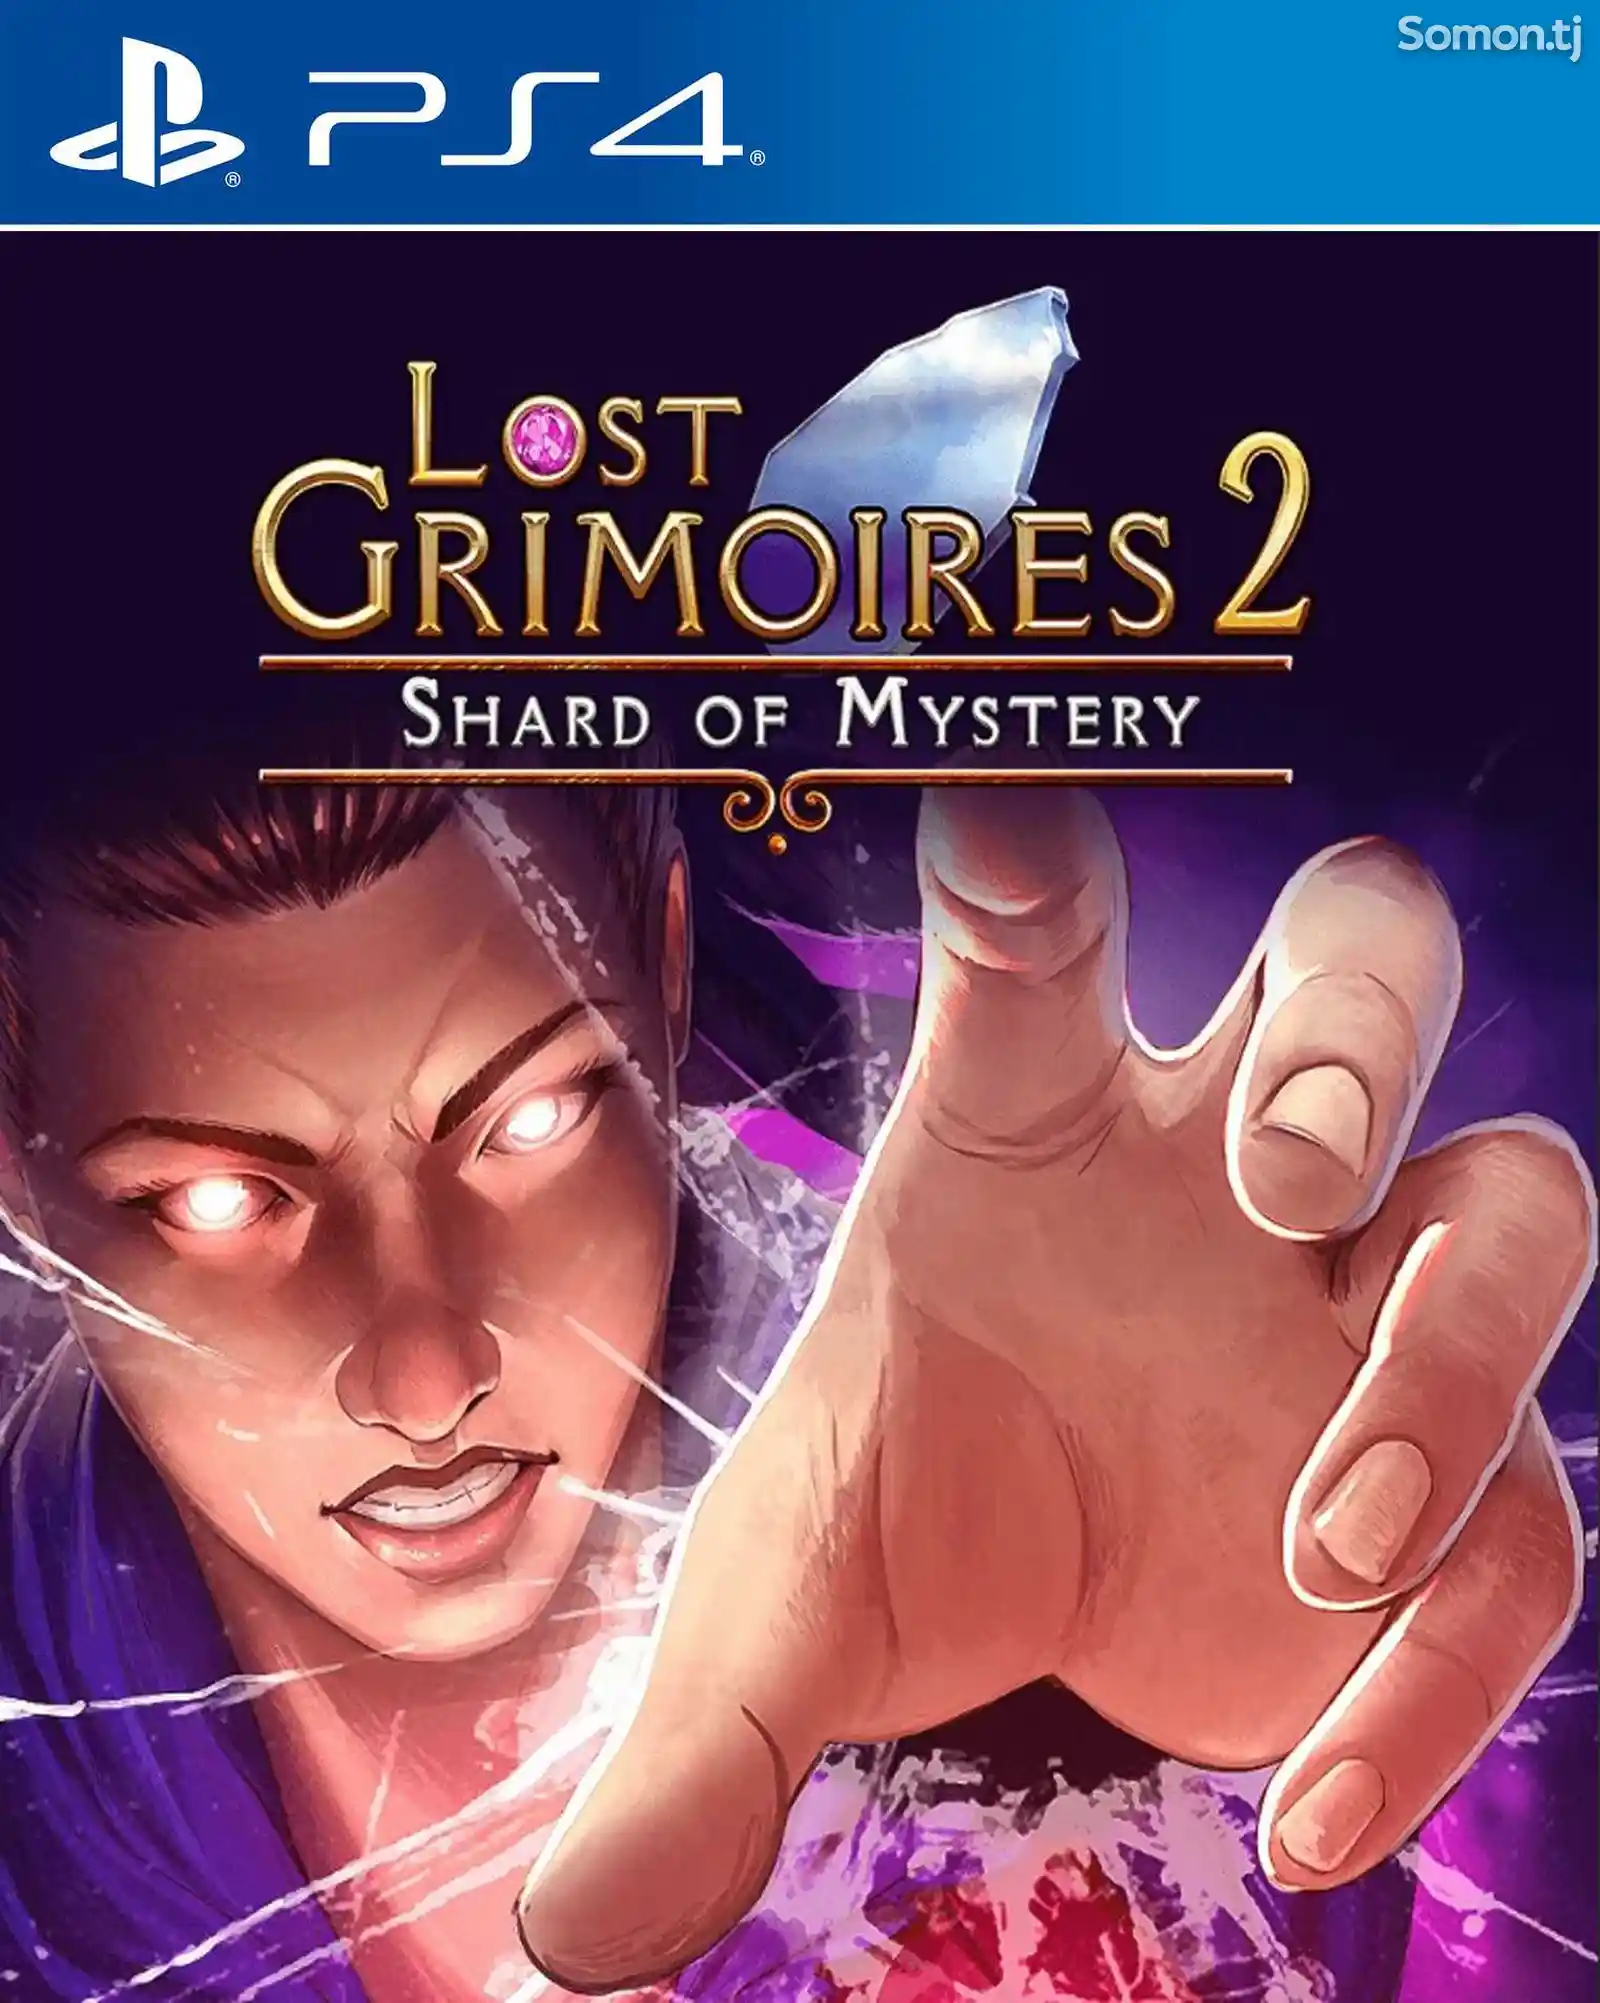 Игра Lost grimoires 2 shard of mystery для PS-4 / 5.05 / 6.72 / 7.02 / 9.00 /-1